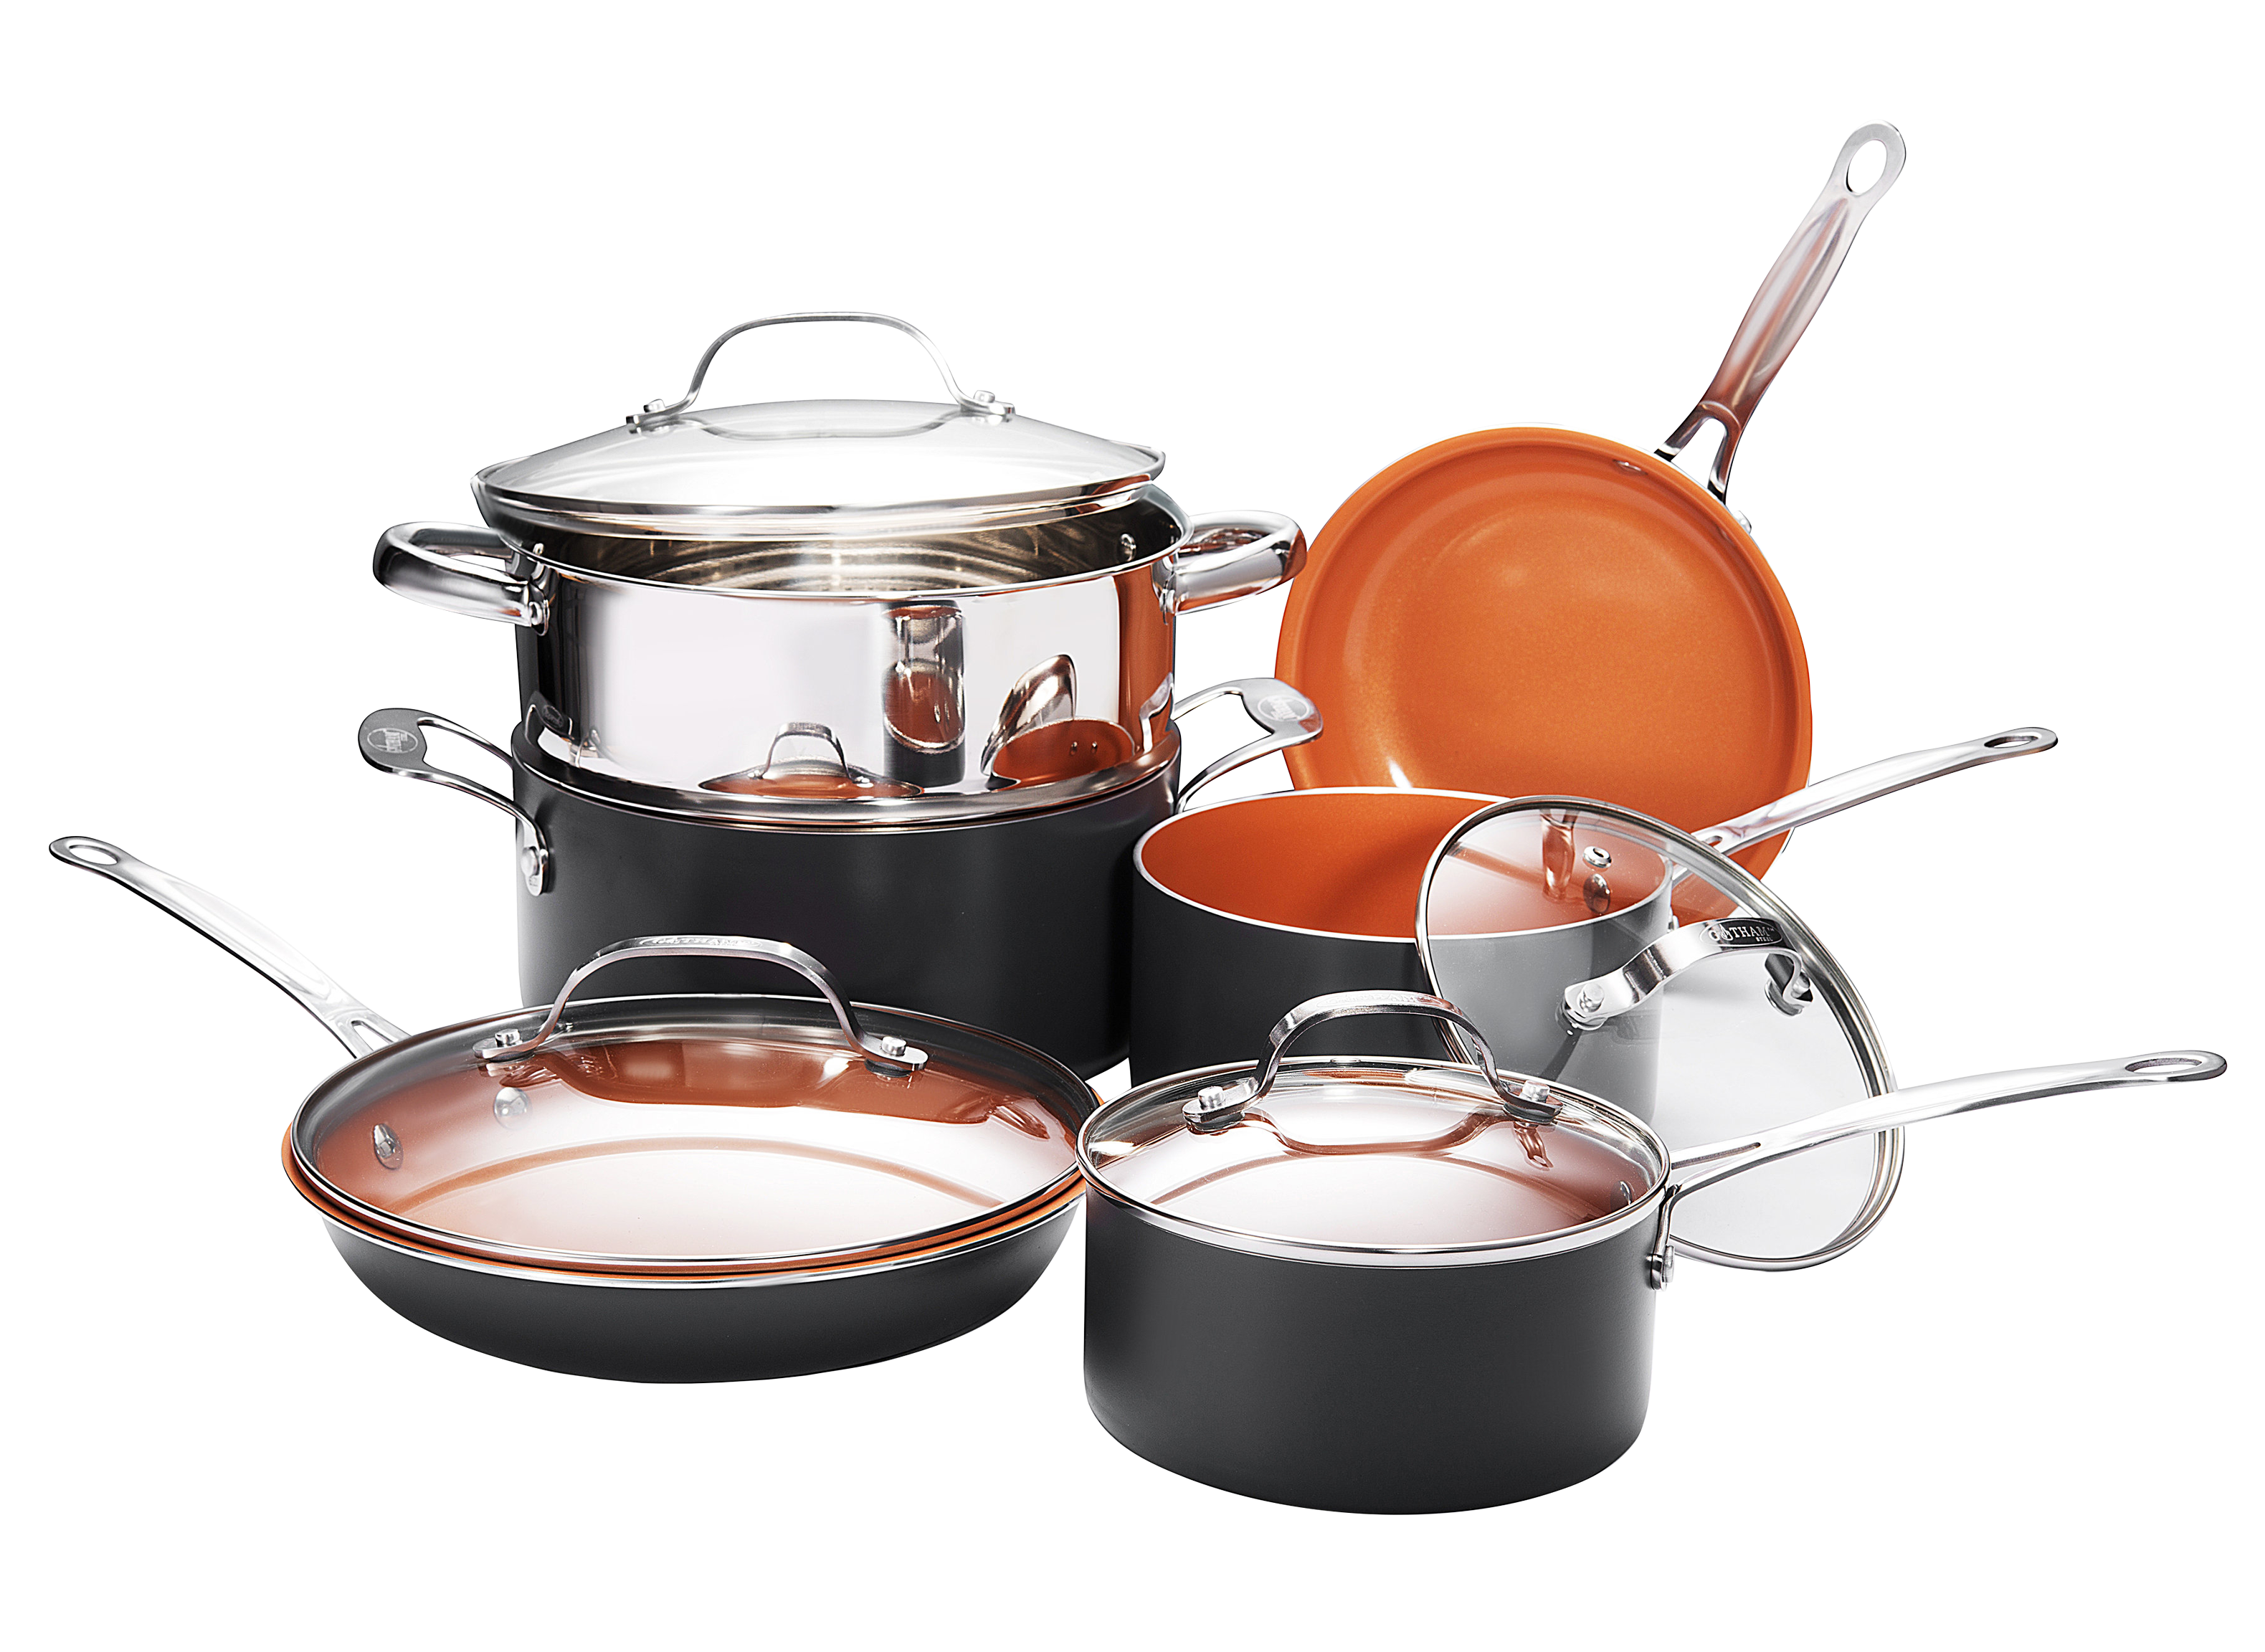 https://crdms.images.consumerreports.org/prod/products/cr/models/394743-non-stick-cookware-gotham-steel-nonstick-62480.png